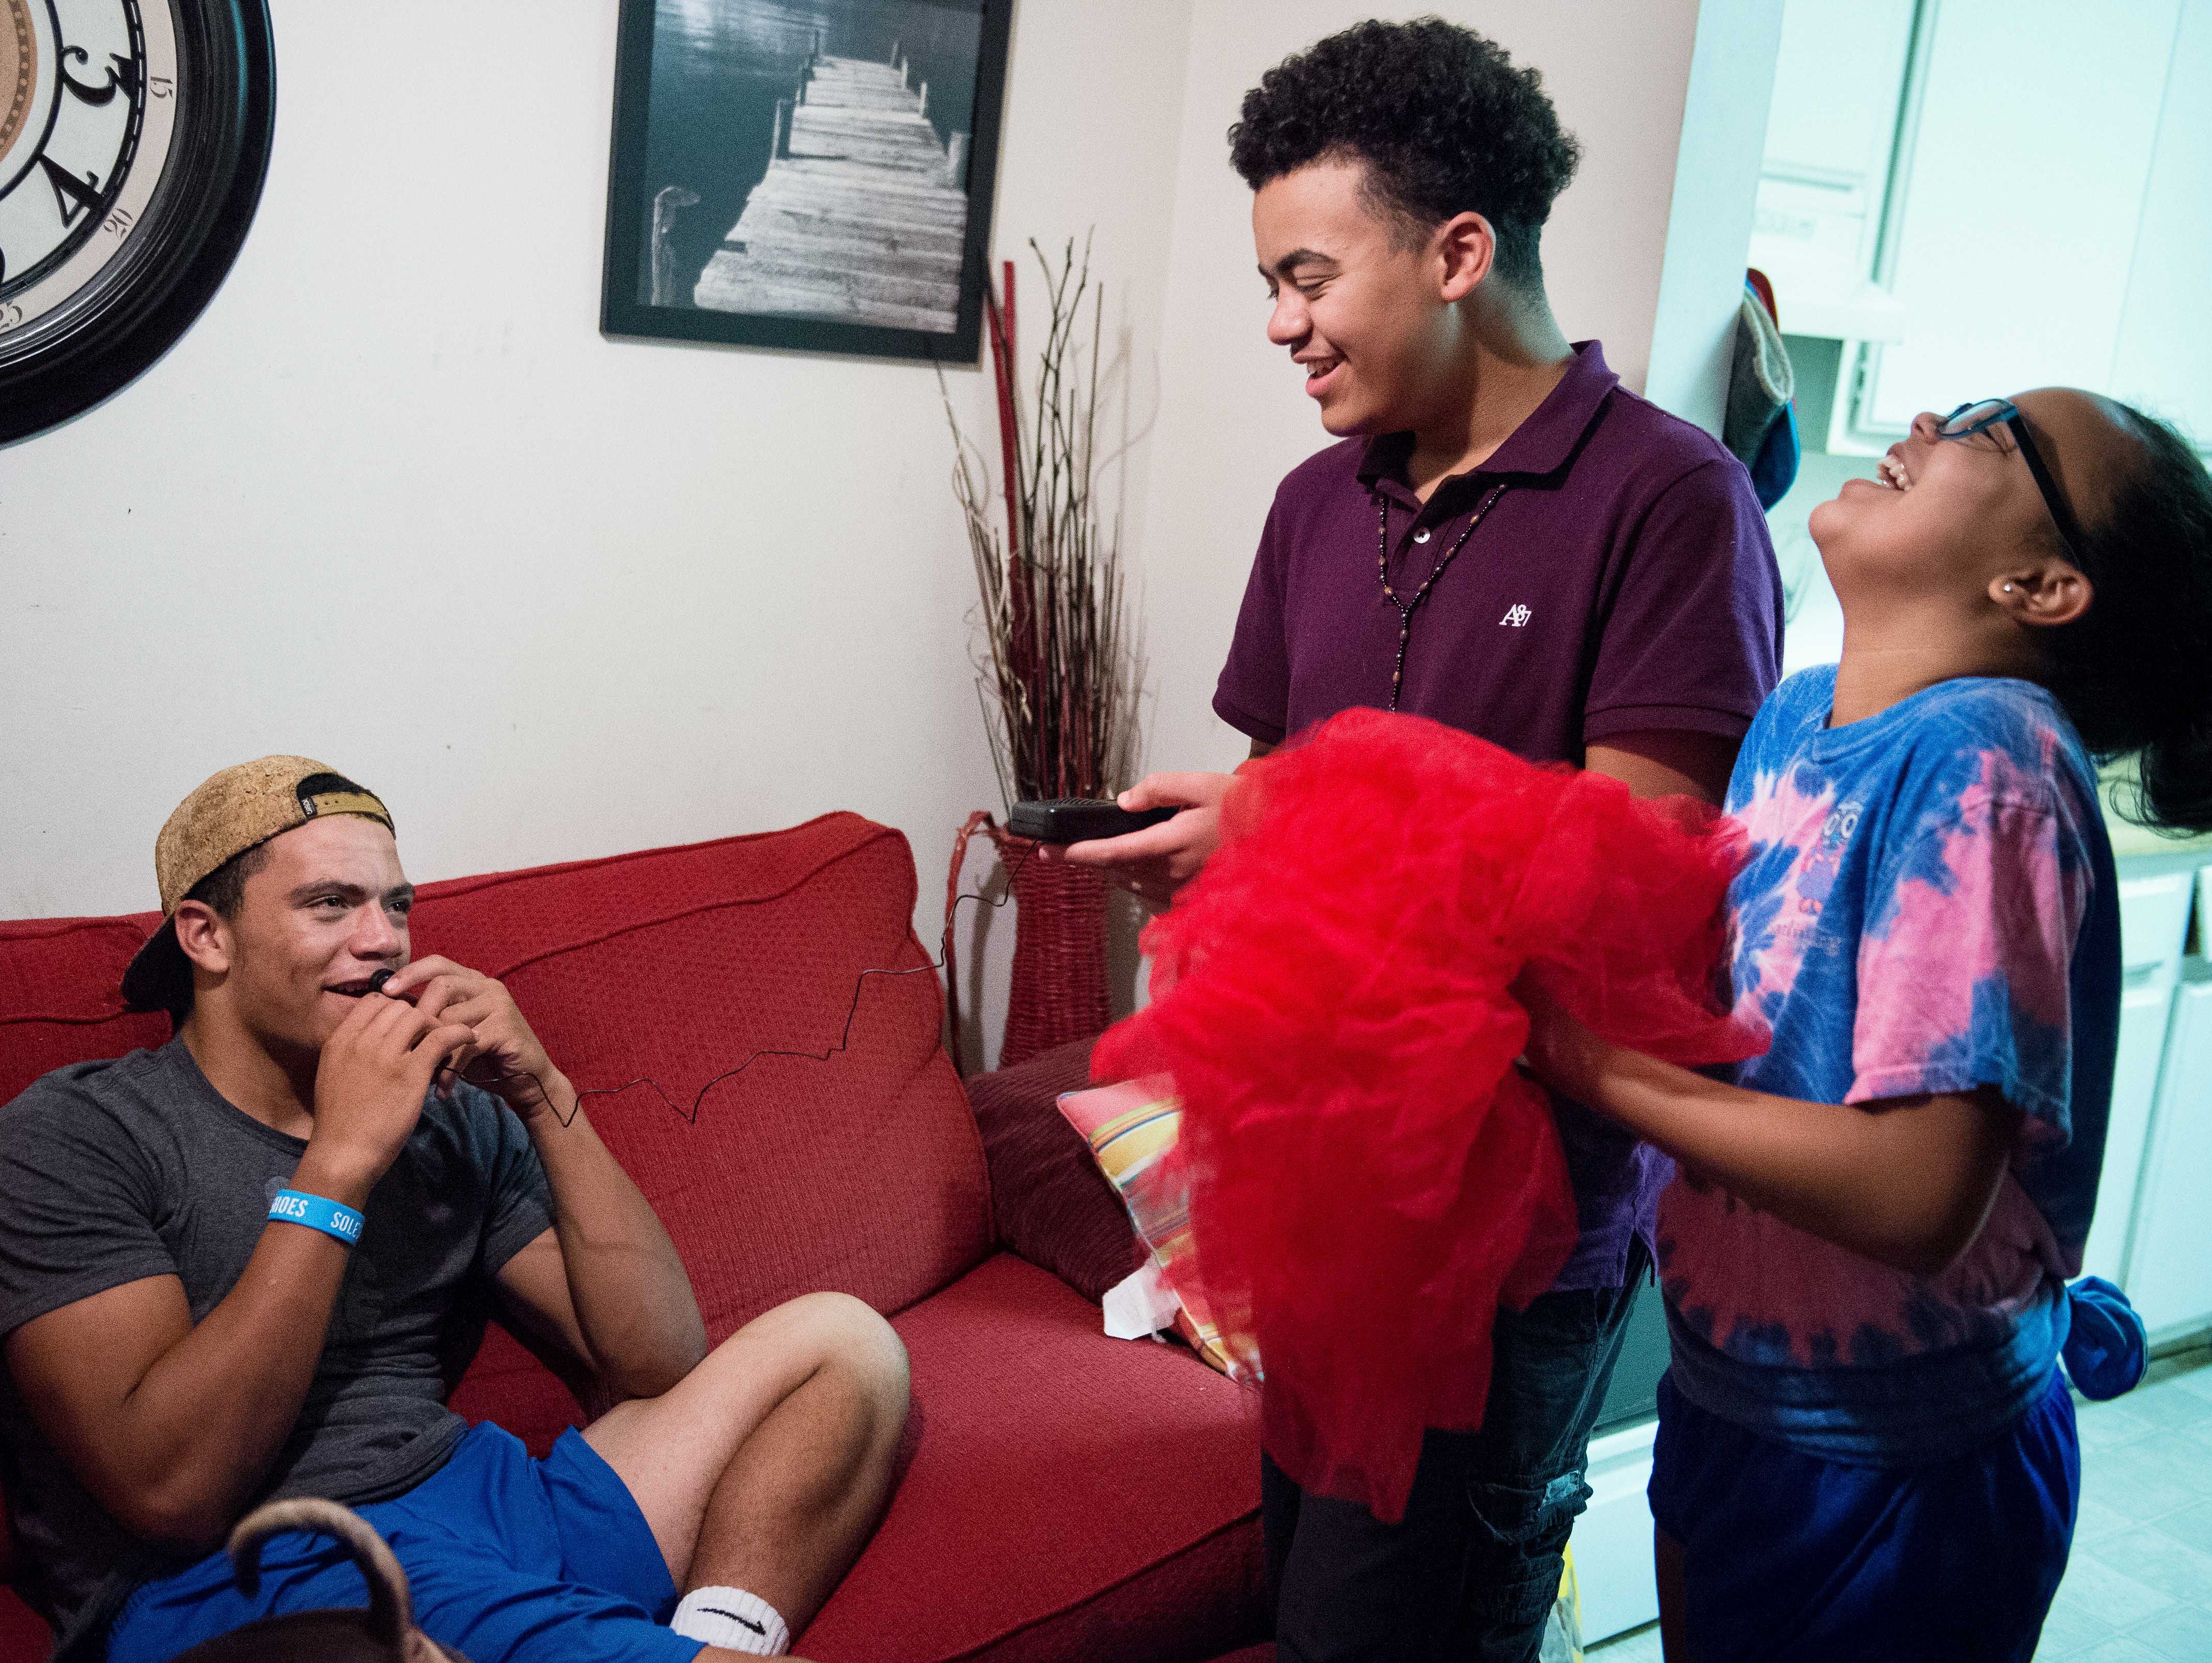 Shawn Murphy jokes around with his brother Dennis Hancock, 14, and his sister Alayna Hancock, 11, at their home, Tuesday, Oct. 25, 2016, in Nashville, Tenn.